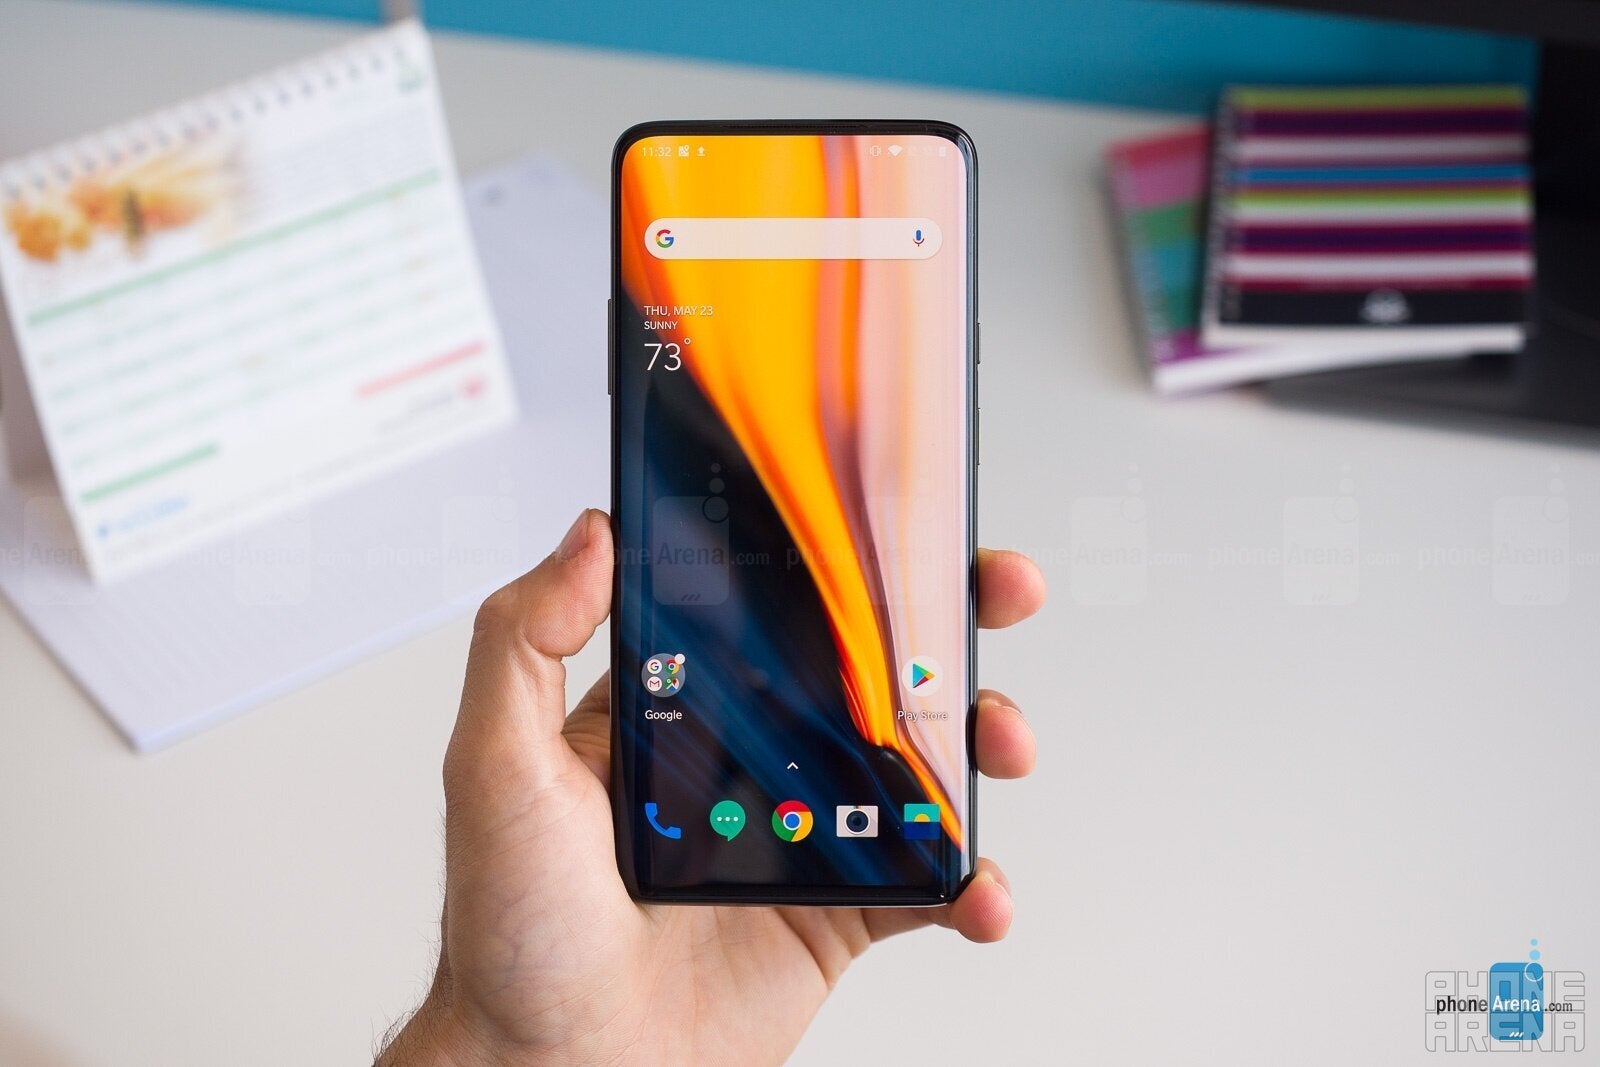 The OnePlus 7 Pro looks like a very tough act to follow - OnePlus 7T gets its specs leaked, and they're pretty awesome